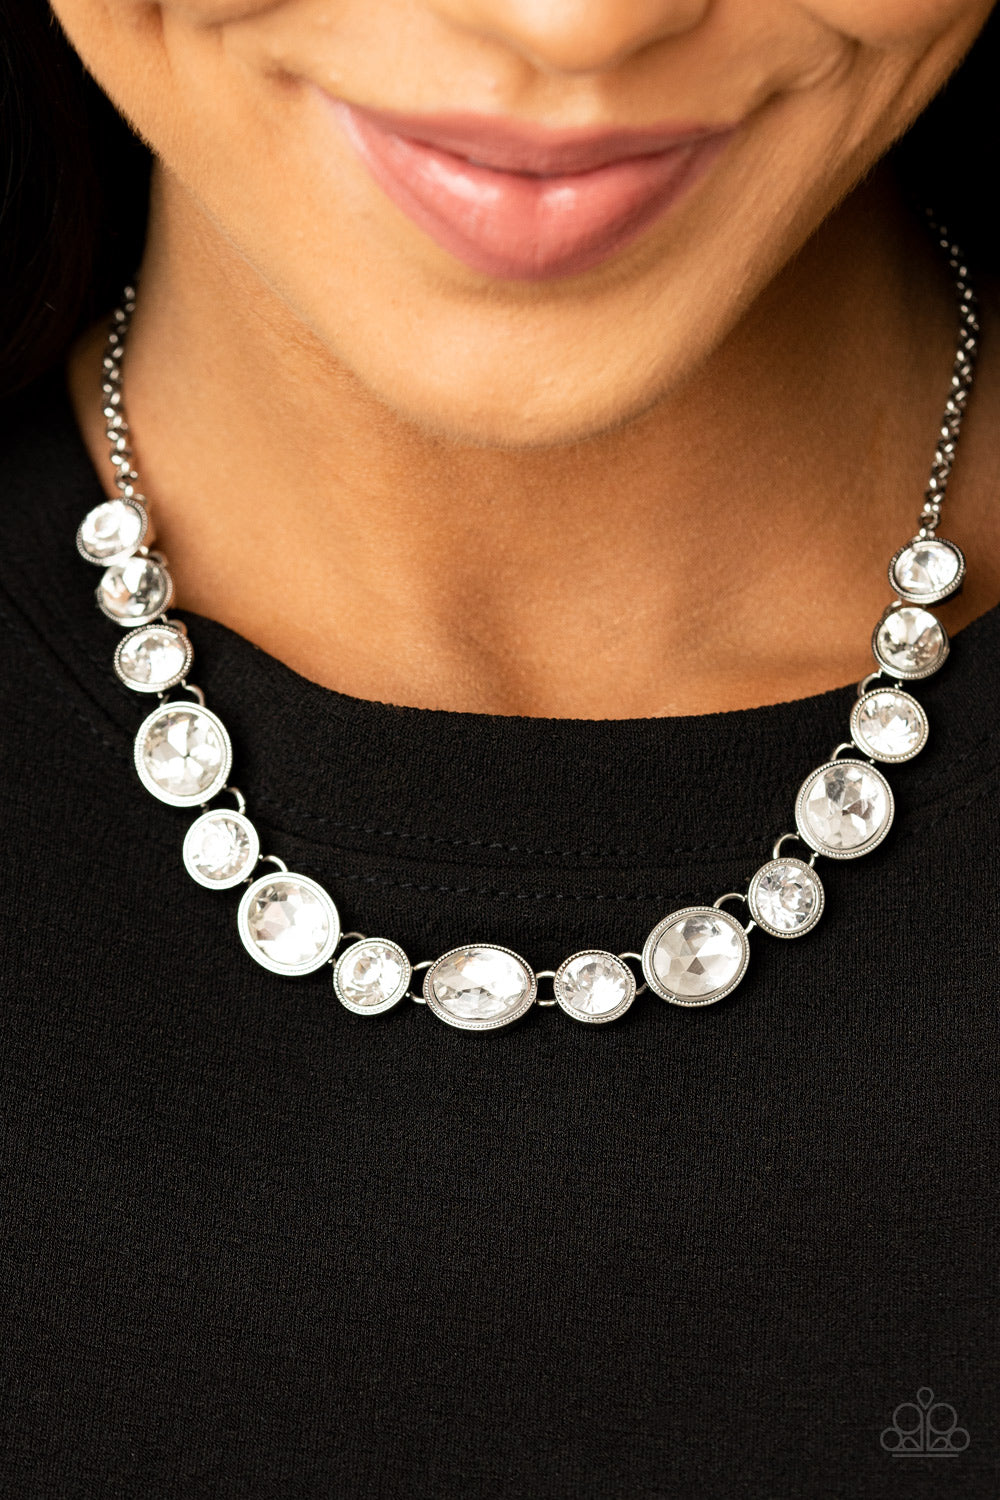 Girls Gotta Glow - White and Silver Necklace - Paparazzi Accessories - Encased in sleek silver frames, oval and round white rhinestones alternate below the collar for a timeless look. Features an adjustable clasp closure. Sold as one individual necklace.